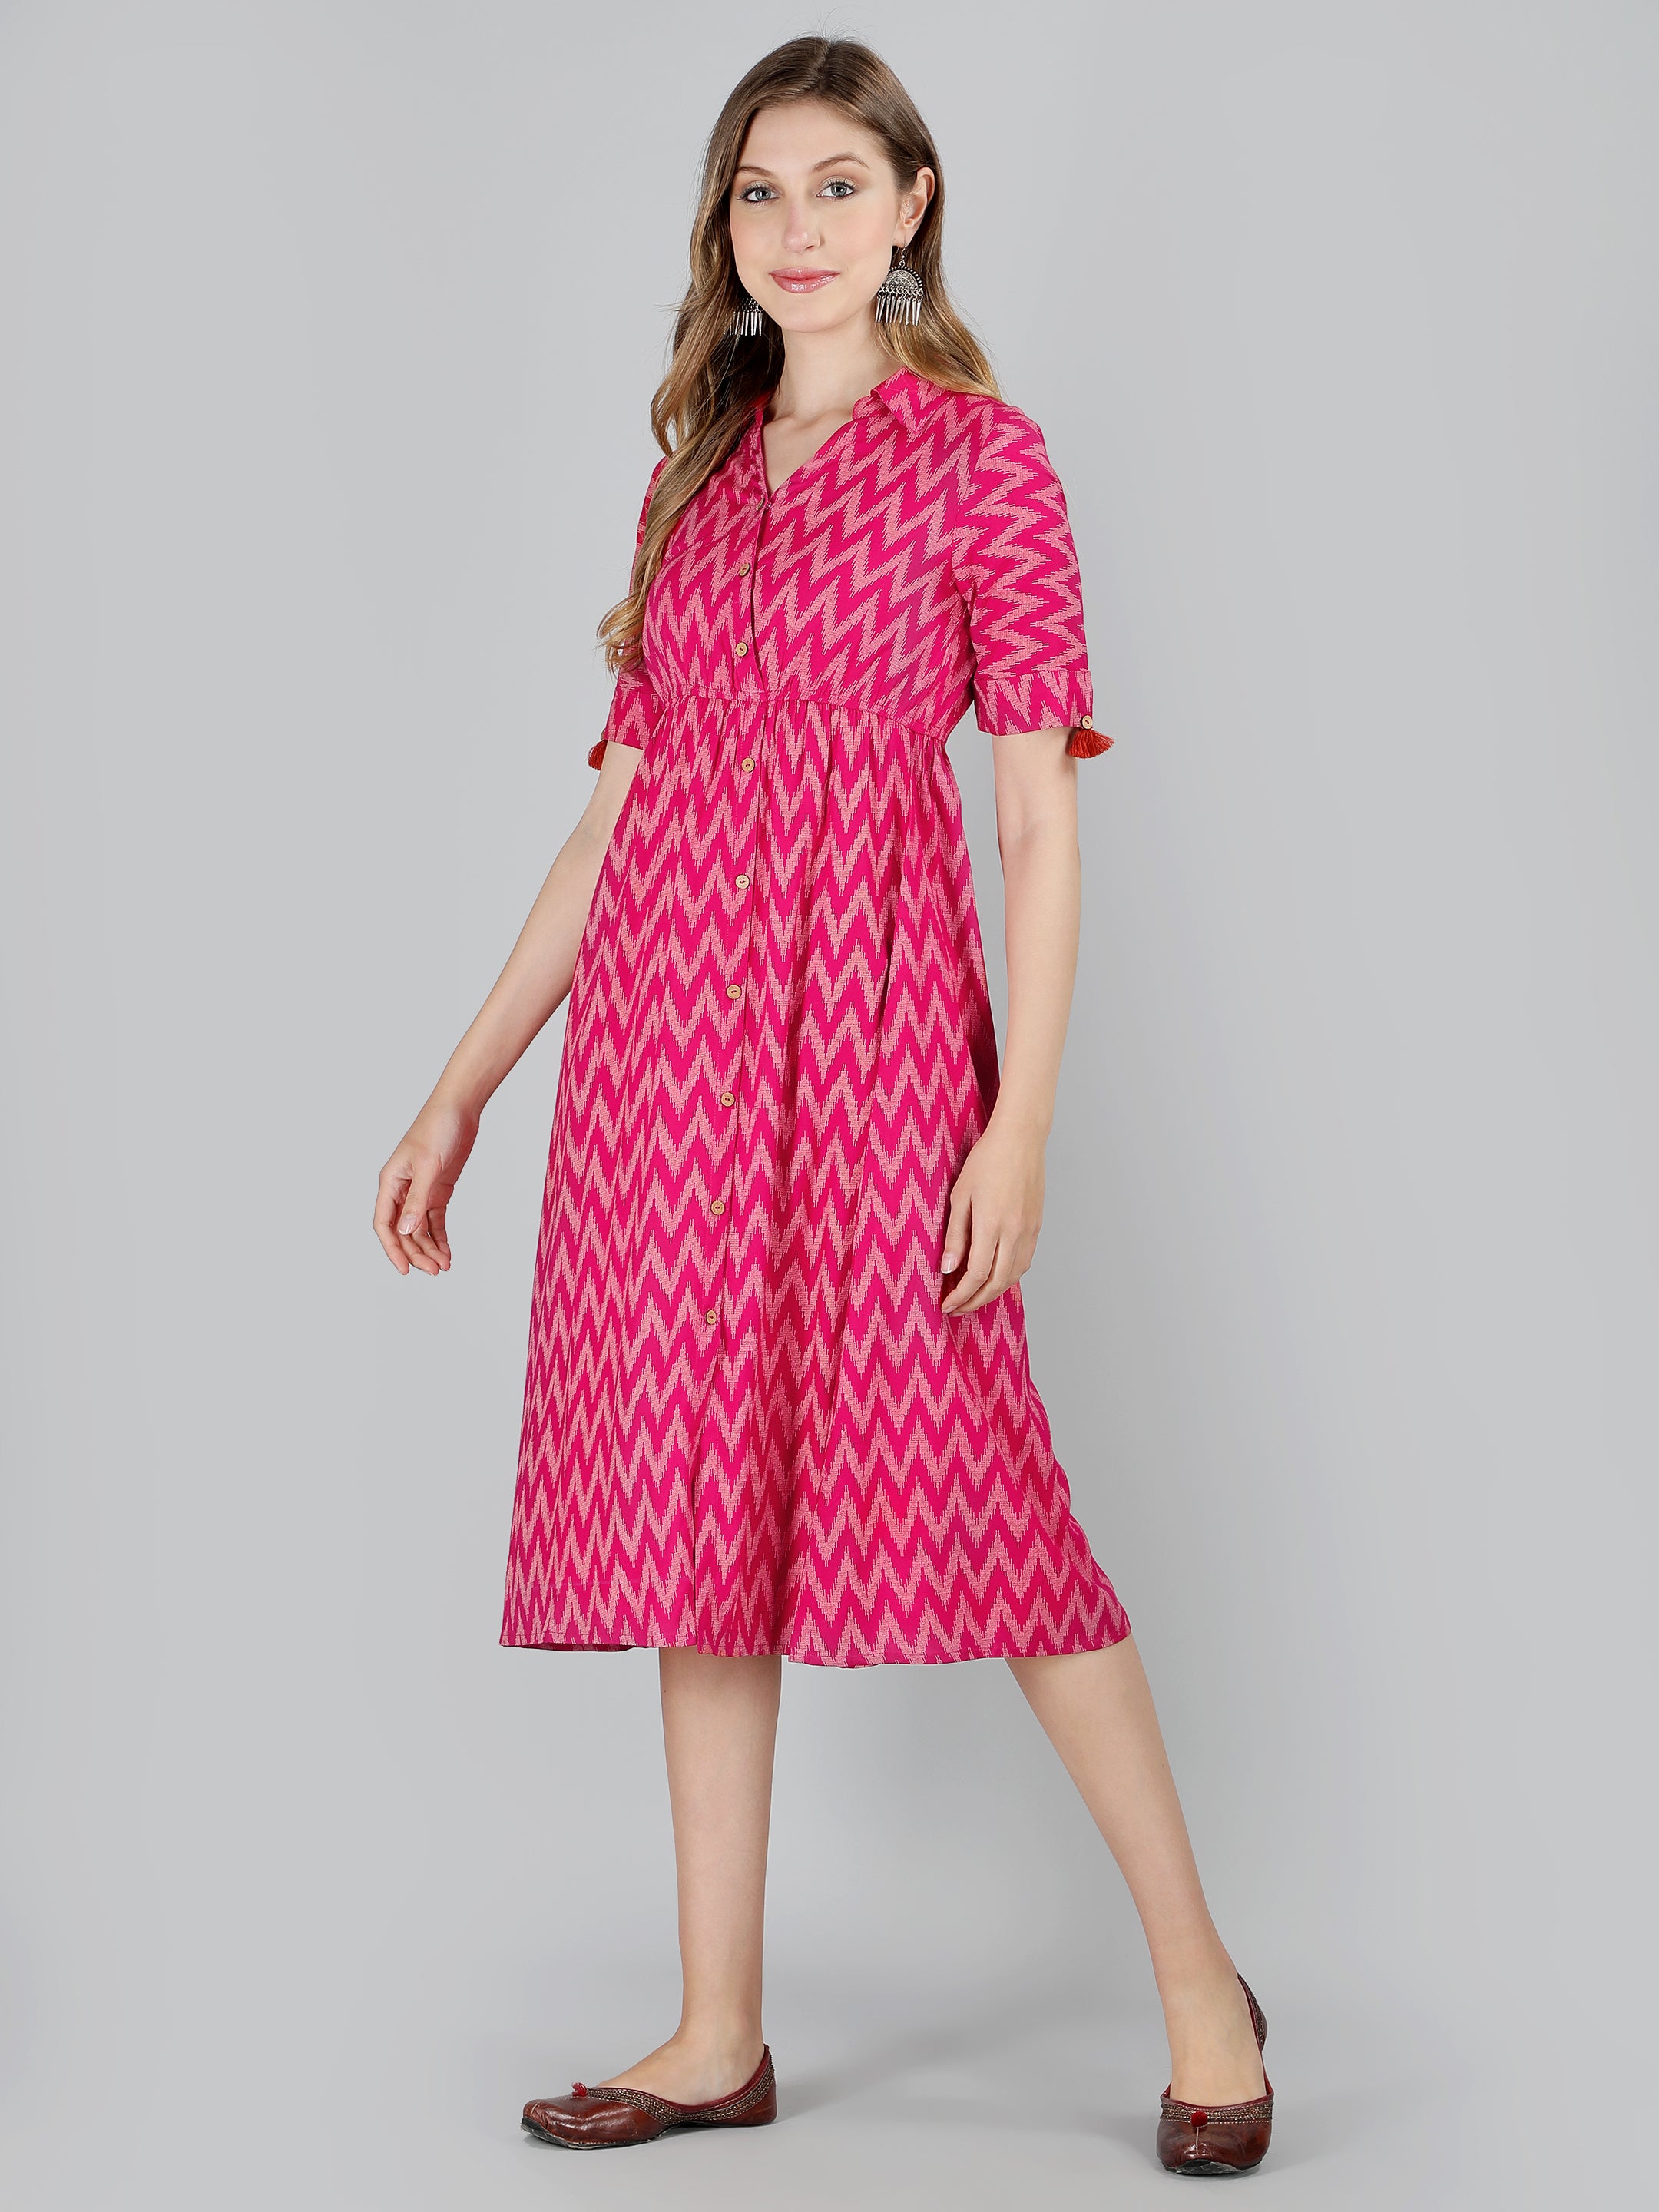 this-classic-shirt-dress-is-a-must-have-for-any-wardrobe-the-simple-clean-lines-flatter-every-figure-while-the-versatile-color-options-make-it-easy-to-find-the-perfect-shade-to-suit-your-style